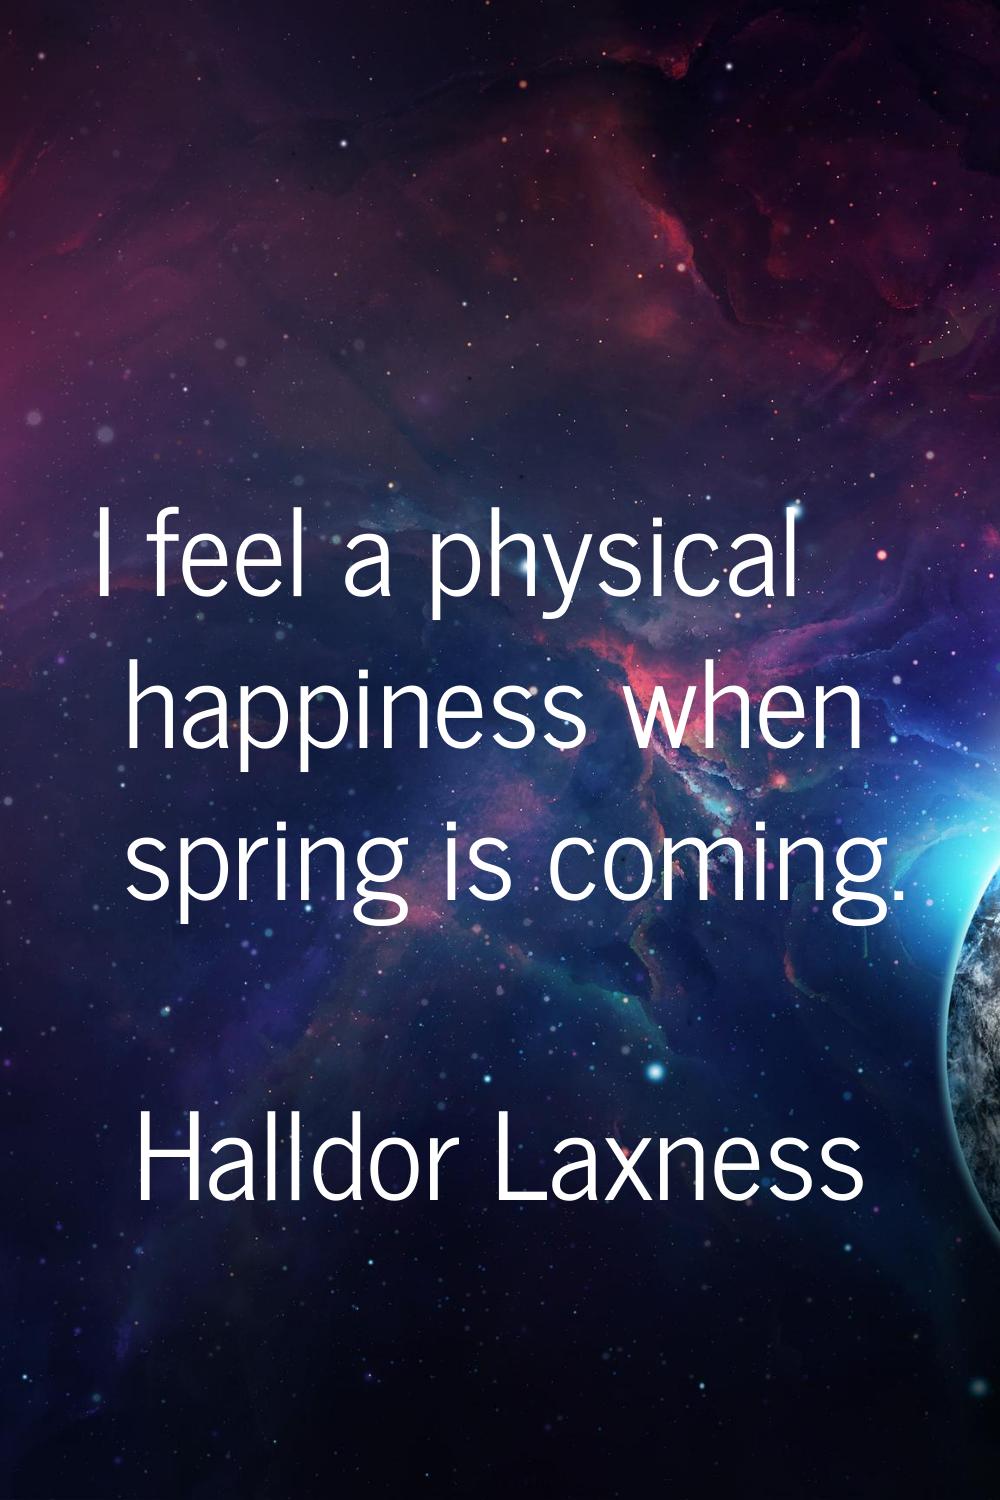 I feel a physical happiness when spring is coming.